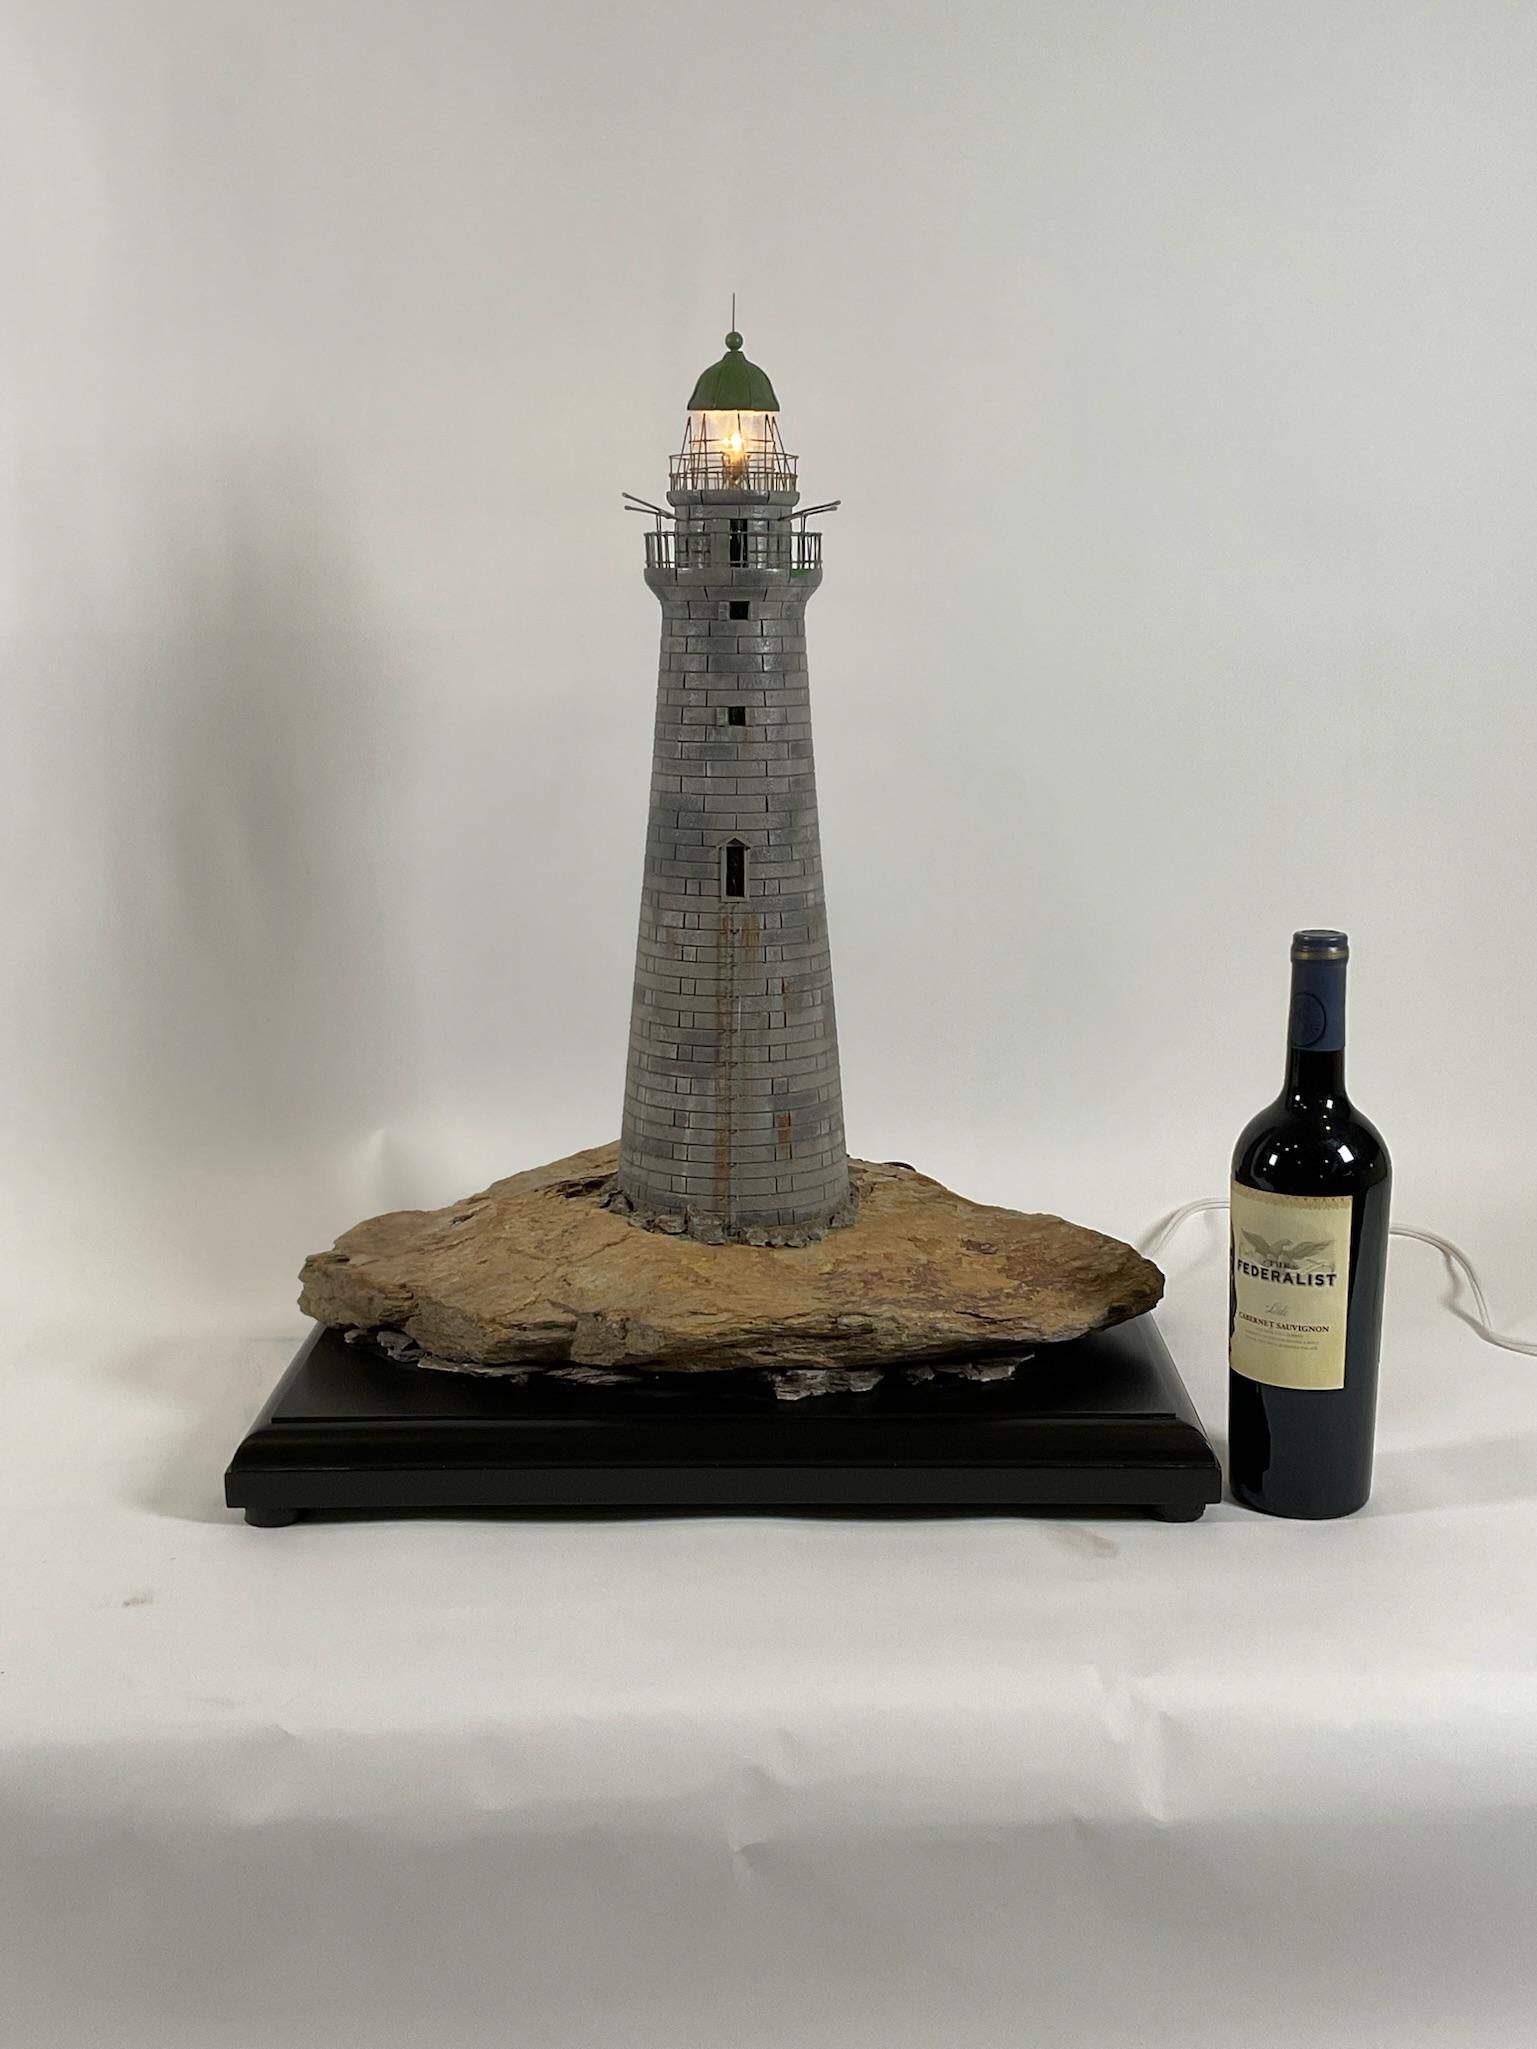 Minots light lighthouse model set onto a ledge. Exceptional model with all stones shown in the proper scale. The top has railings, boat davits, lantern room, spire, etc.

From 1851 to 1860 a lightship replaced the tower at Minots Ledge. Work on